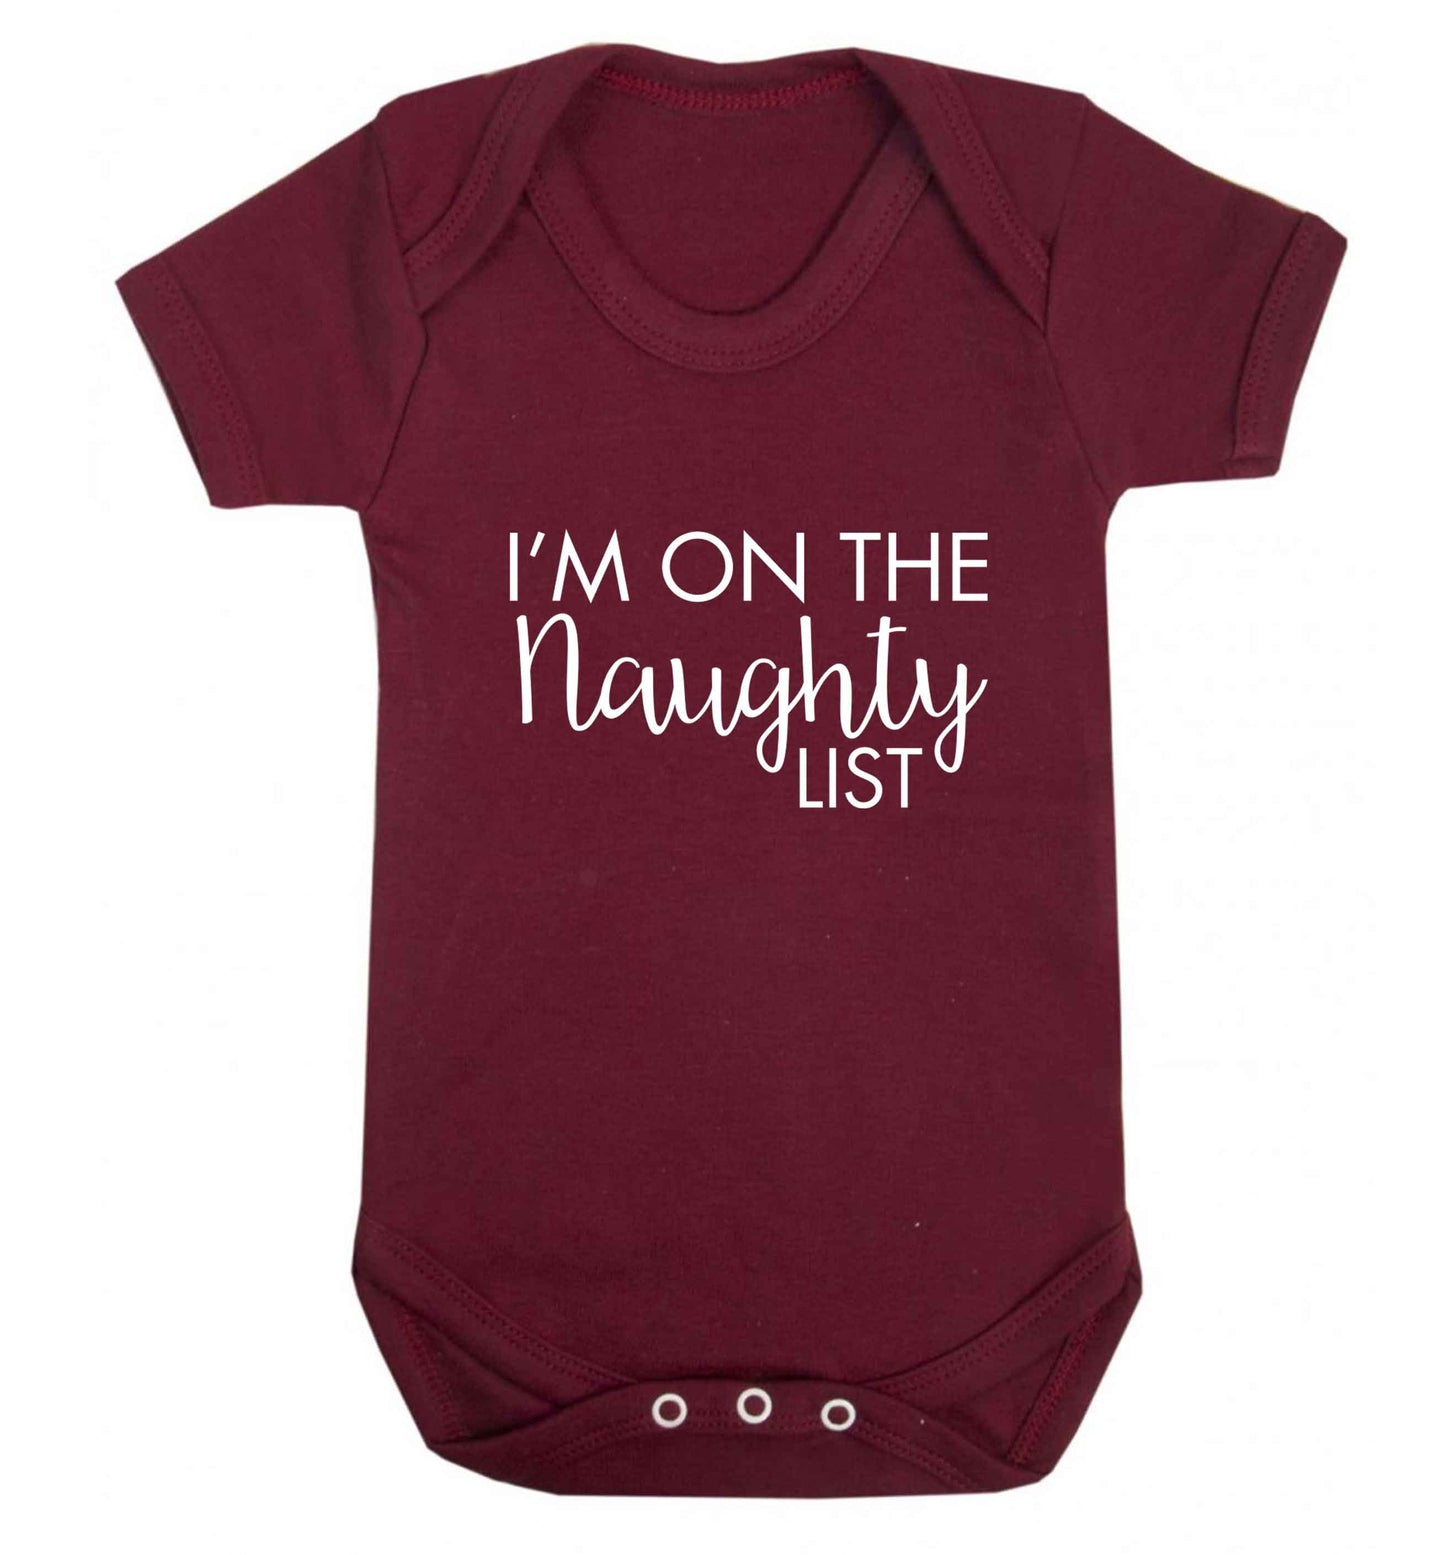 I'm on the naughty list baby vest maroon 18-24 months